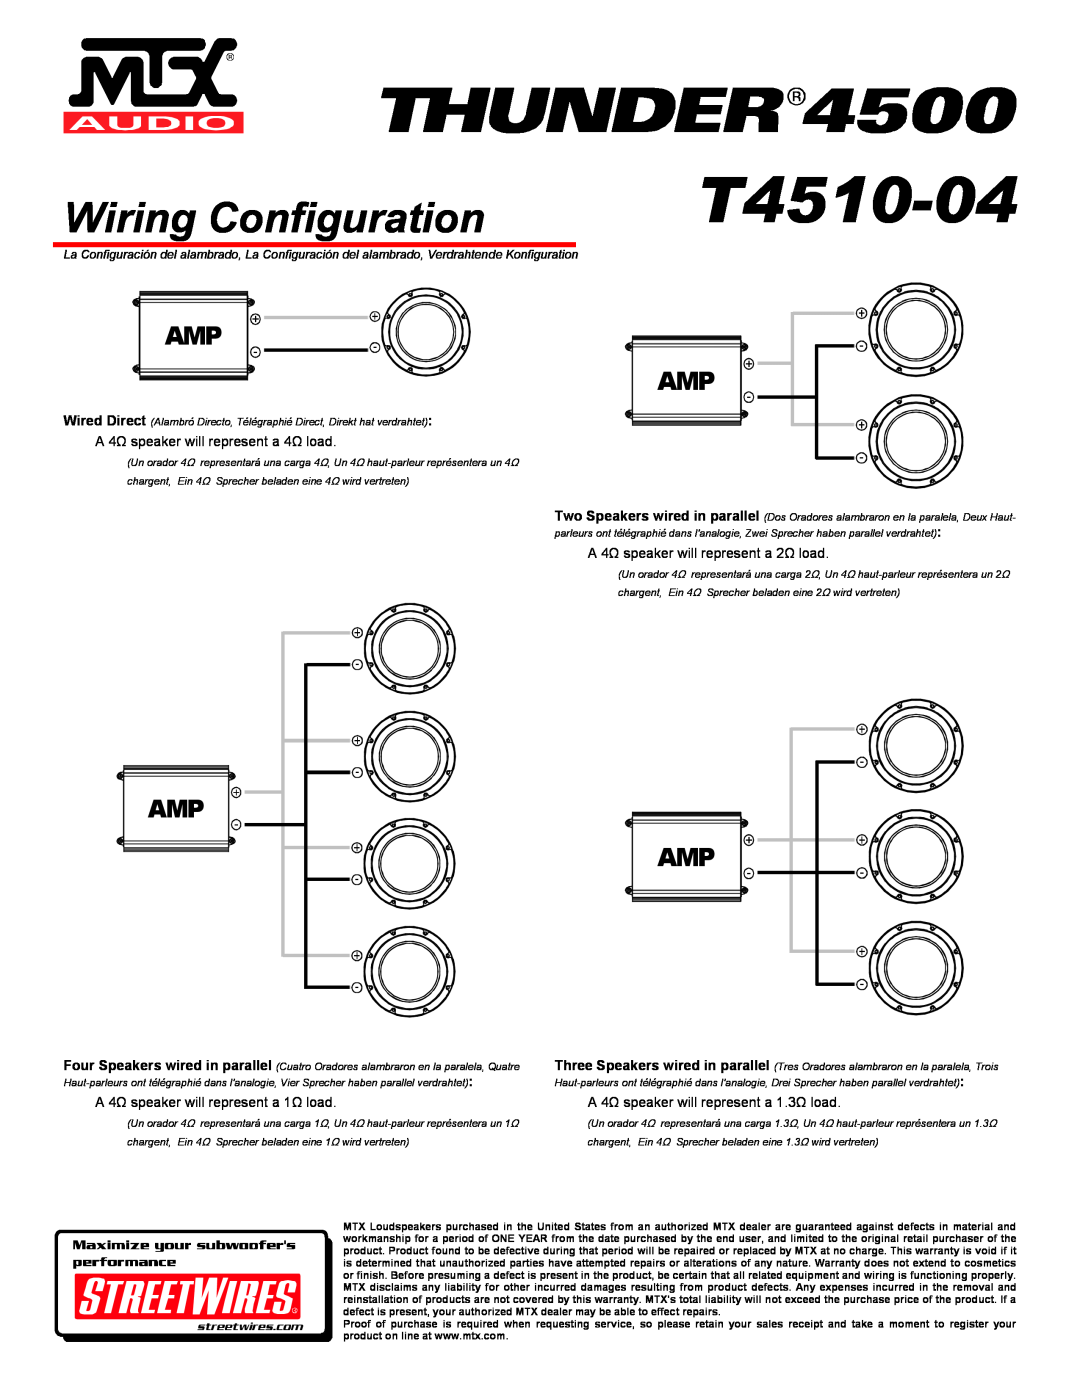 MTX Audio T4510-04 Wiring Configuration, A 4Ω speaker will represent a 4Ω load, A 4Ω speaker will represent a 2Ω load 